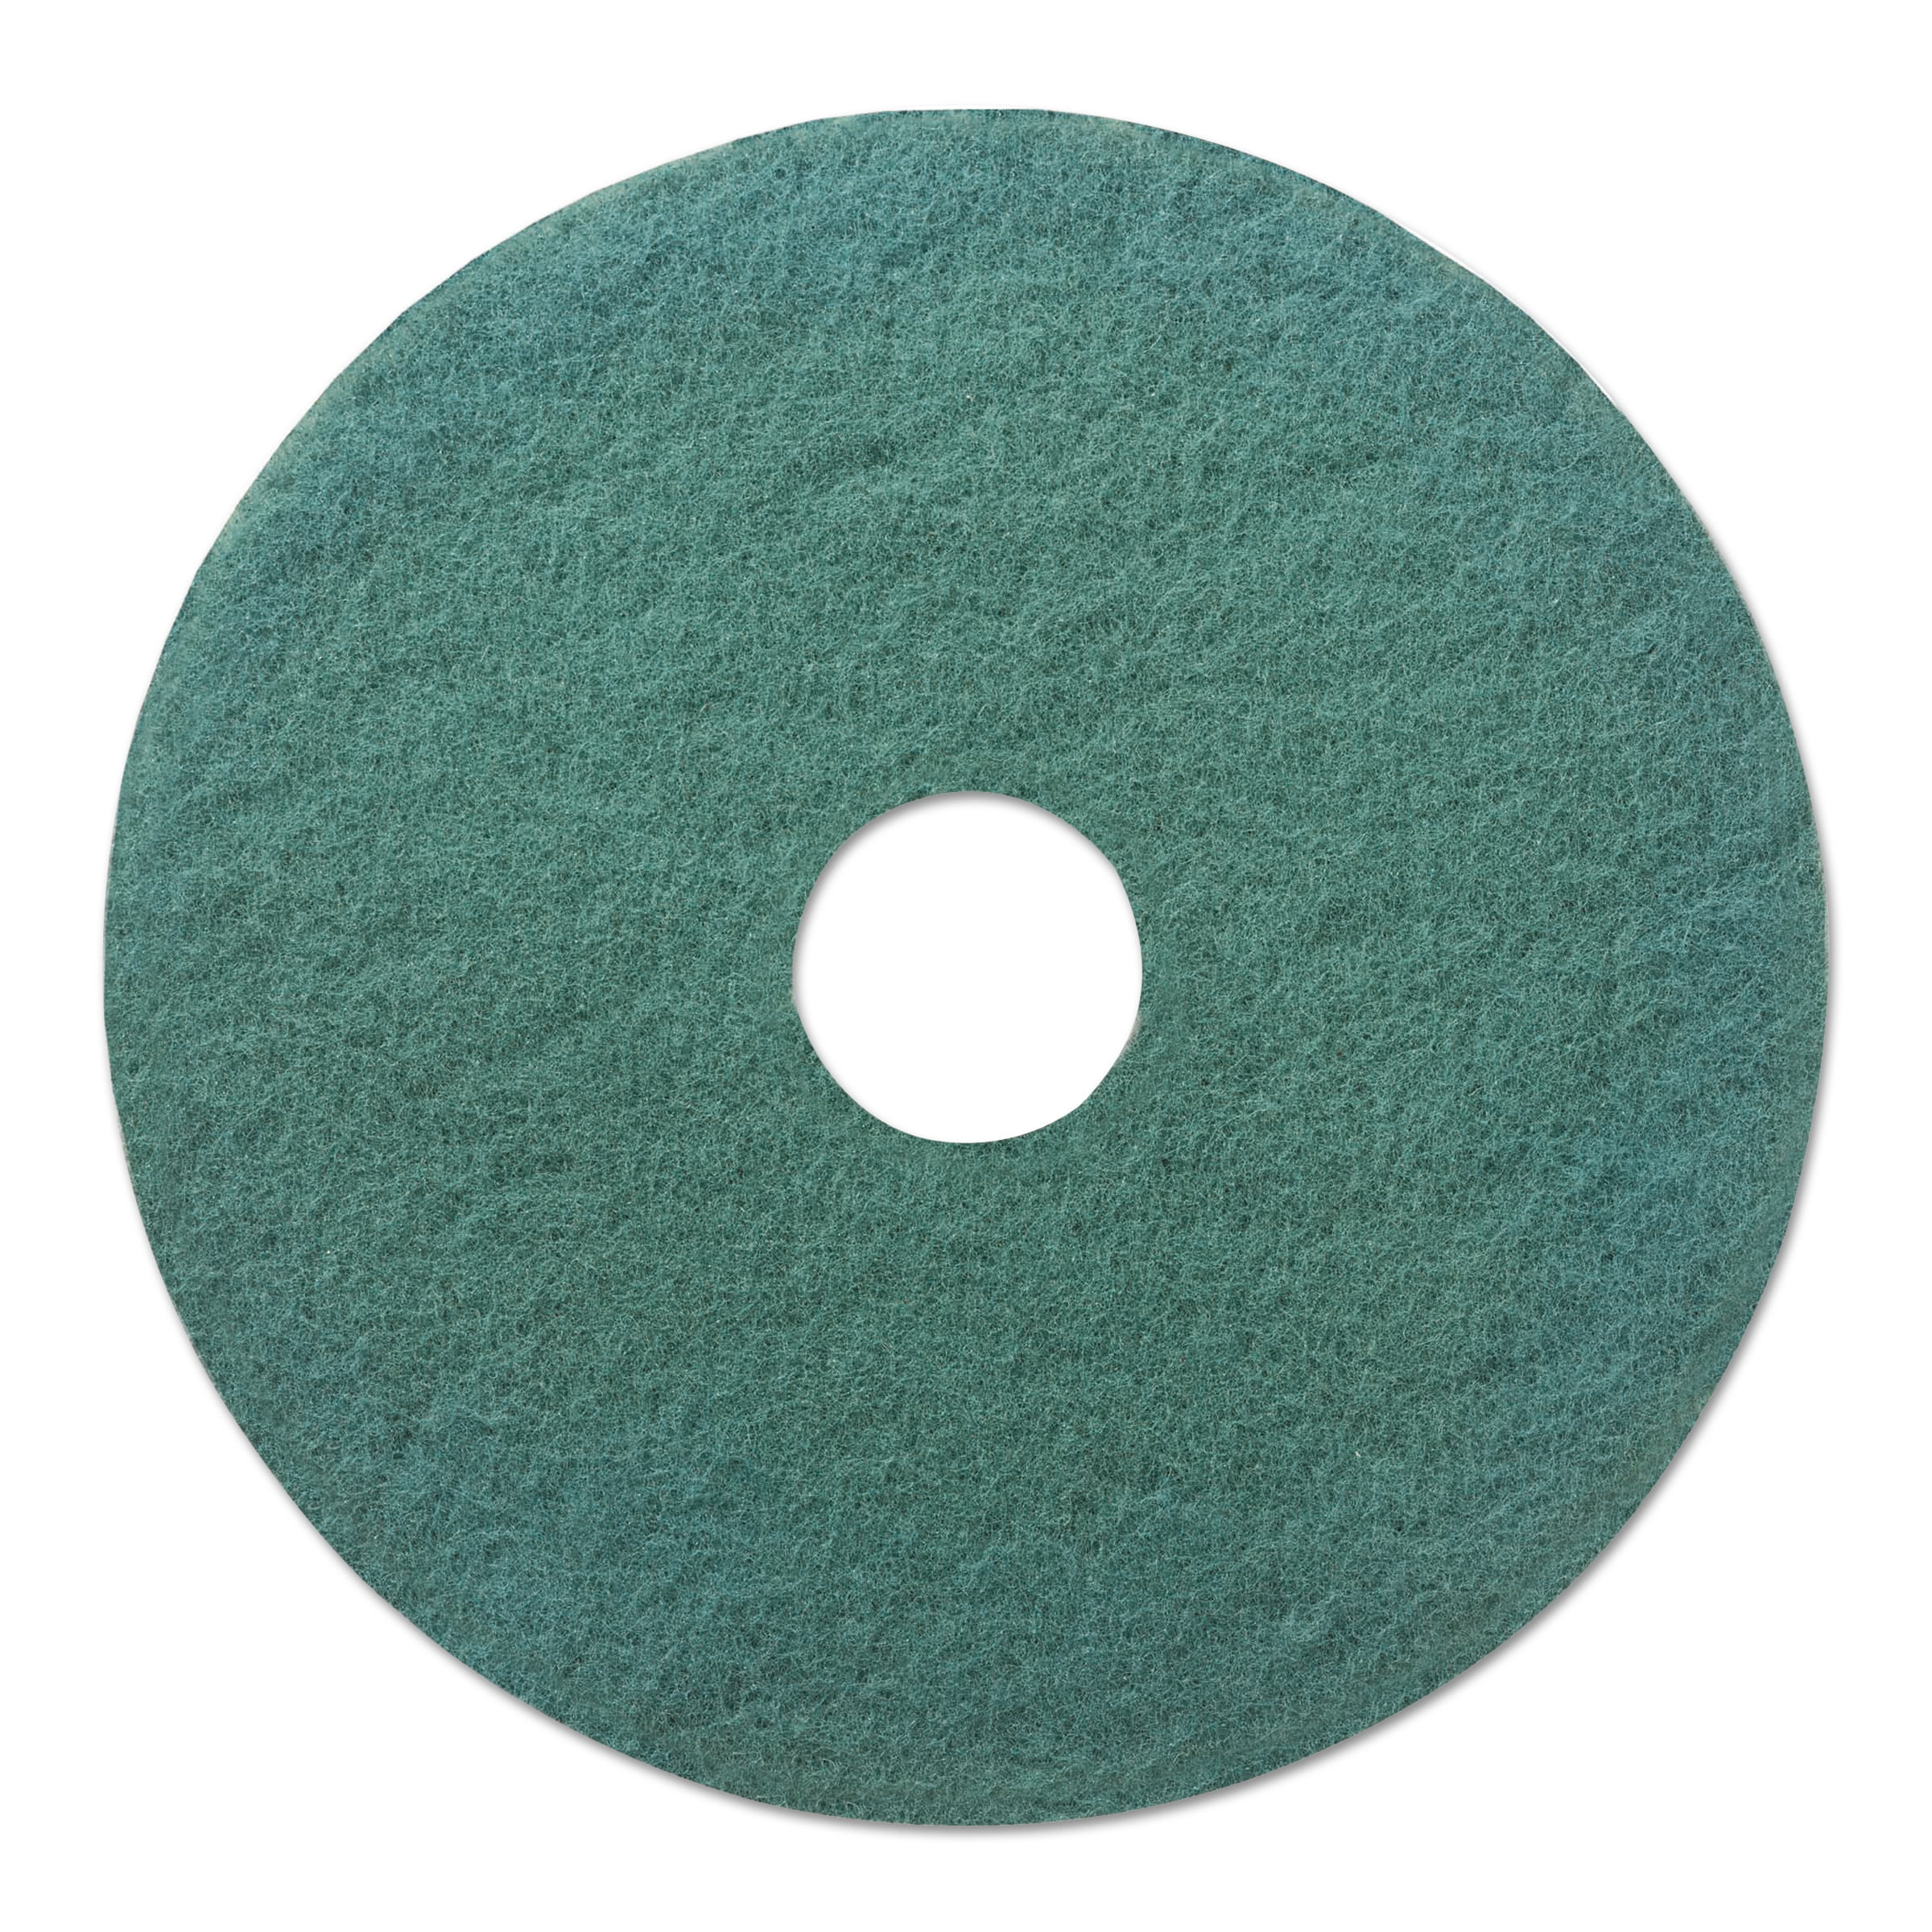 12 INCH GREEN FLOOR PADS FOR CLEANING AND SCRUBBING FLOORS. 